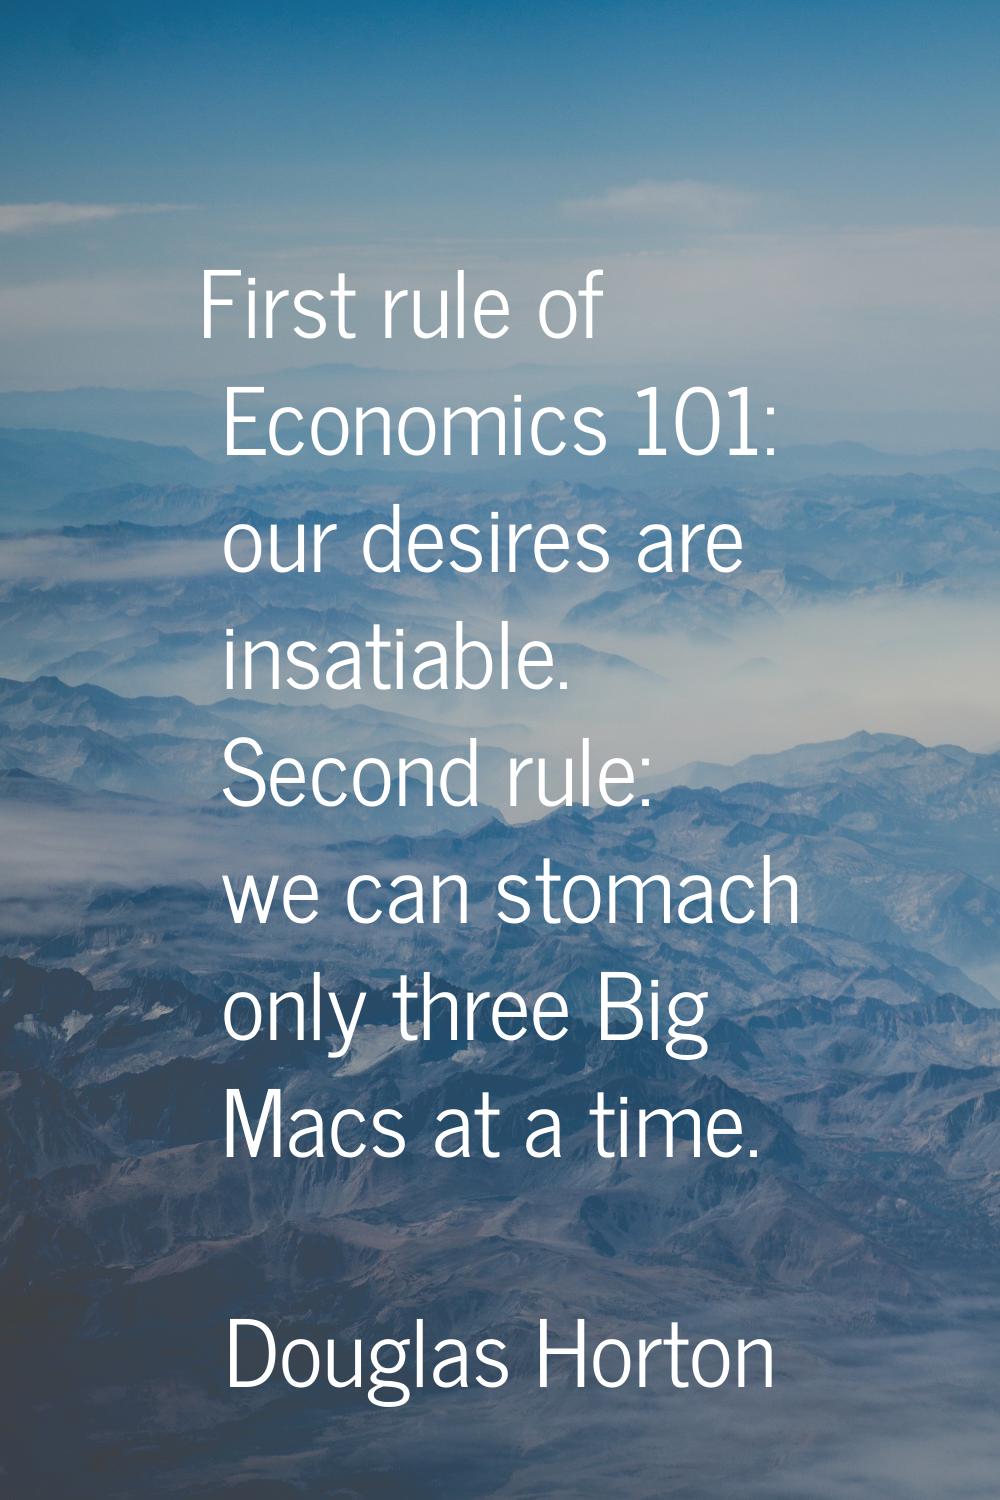 First rule of Economics 101: our desires are insatiable. Second rule: we can stomach only three Big